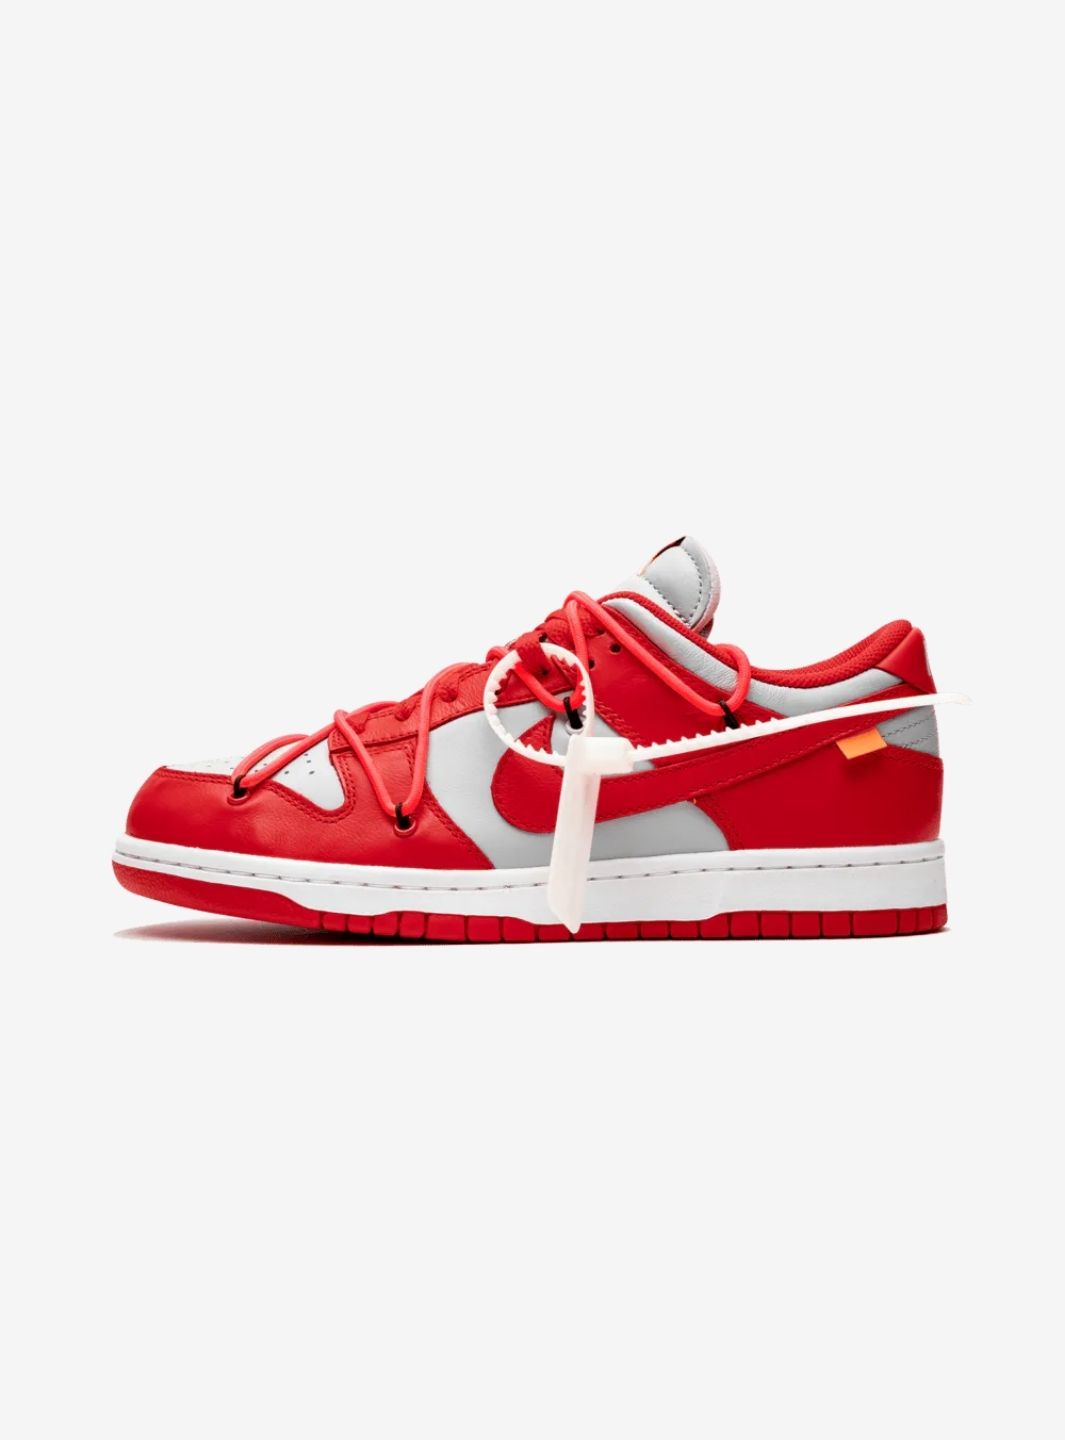 Nike Dunk Low Off-White University Red - CT0856-600 | ResellZone